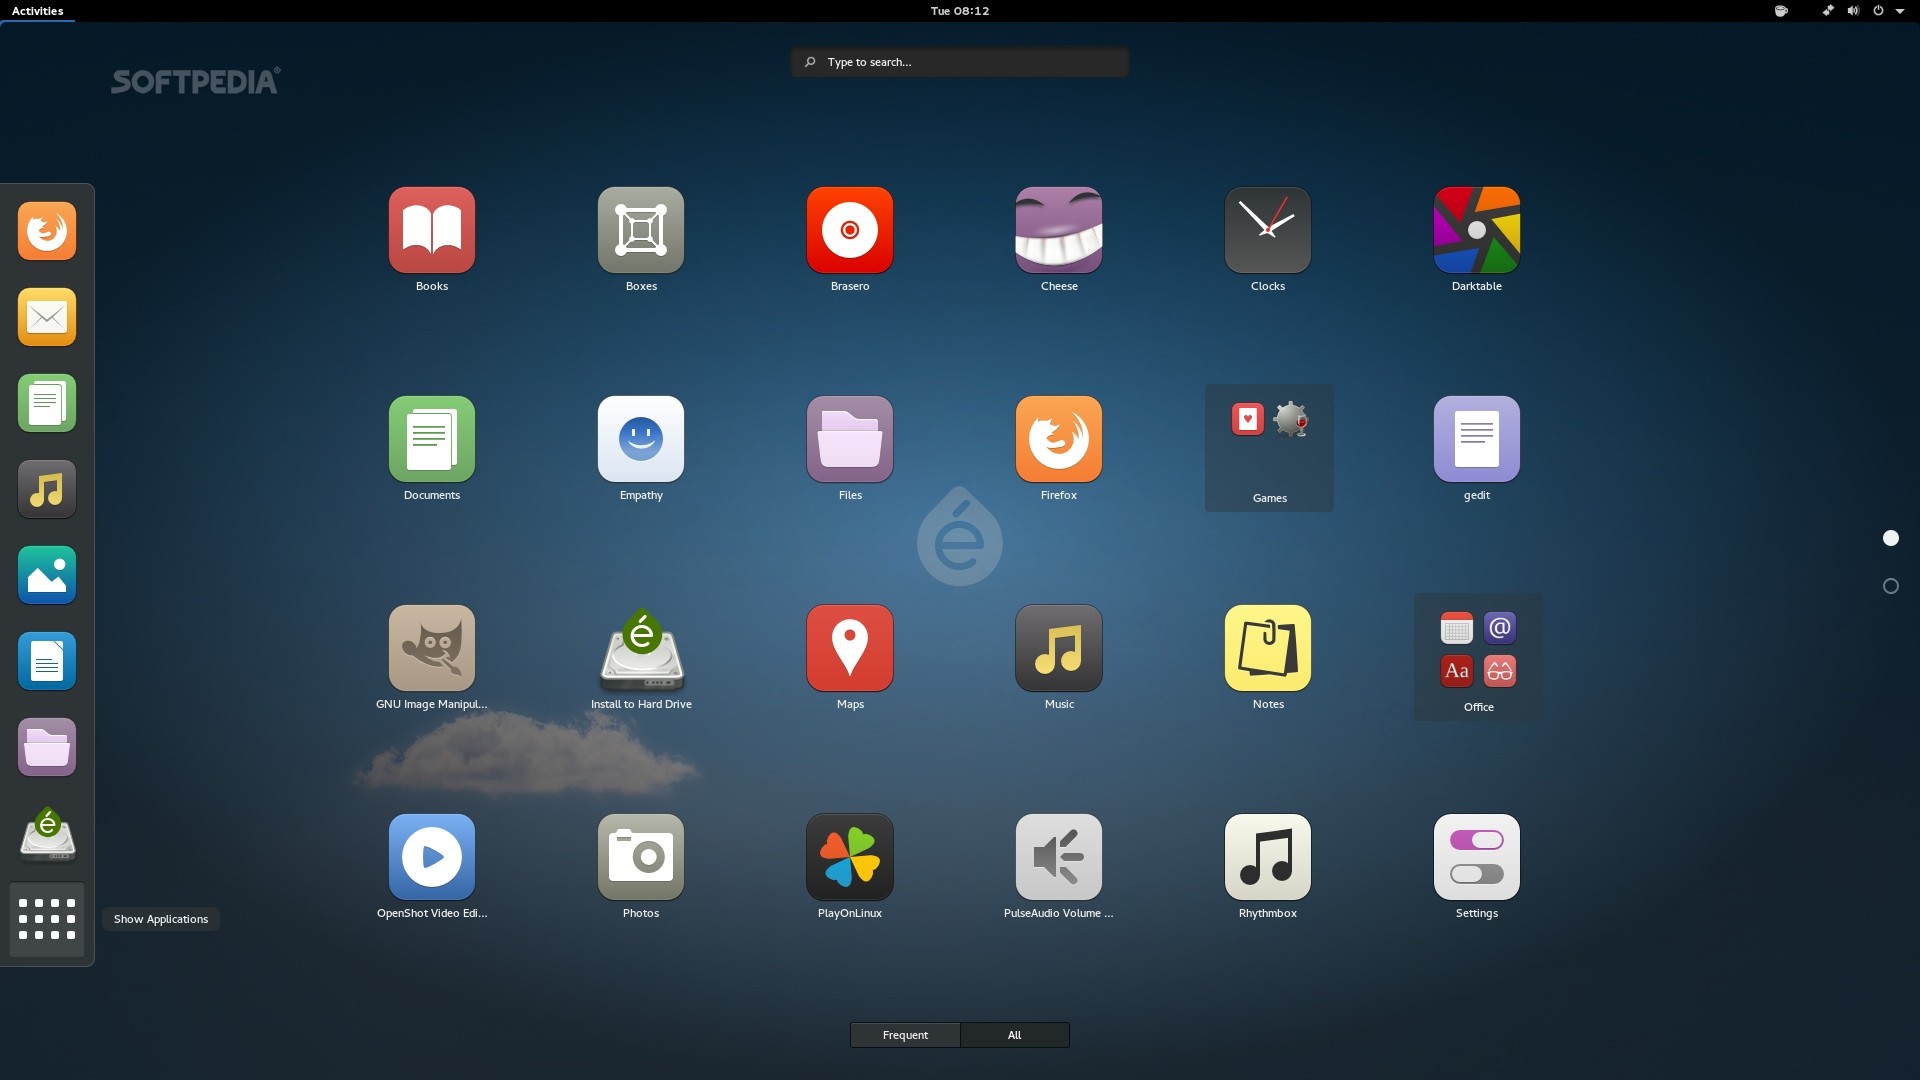 chapeau-23-is-a-beautifully-crafted-linux-distro-based-on-fedora-23-497302-4